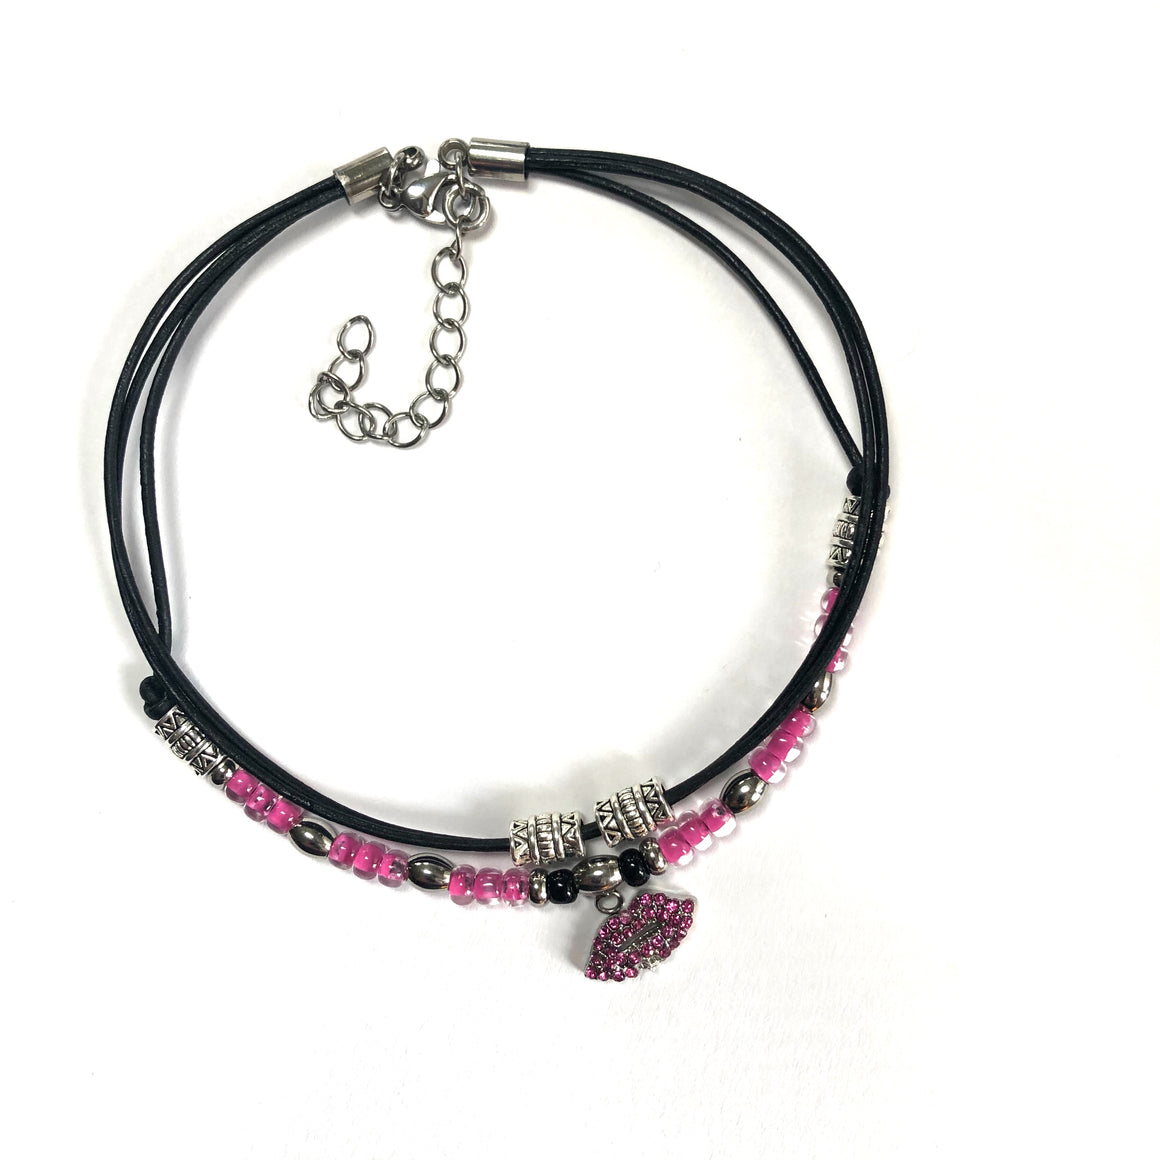 Linked in Pinks—Layered Beaded Crystal Lip Ankle Bracelet #1